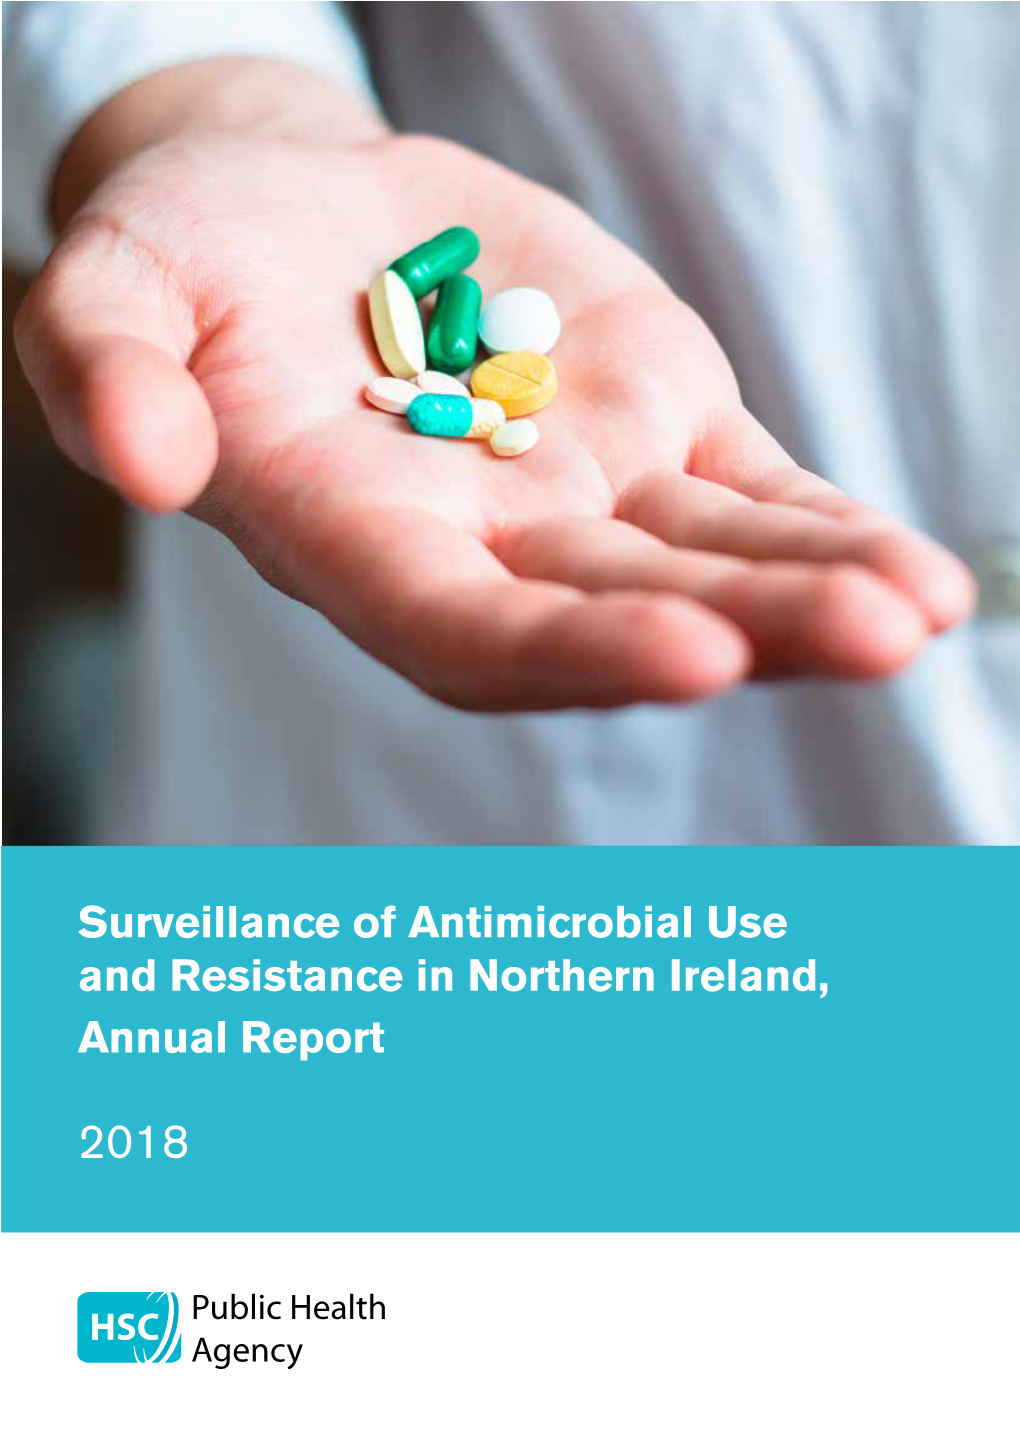 Surveillance of Antimicrobial Use and Resistance in Northern Ireland, Annual Report